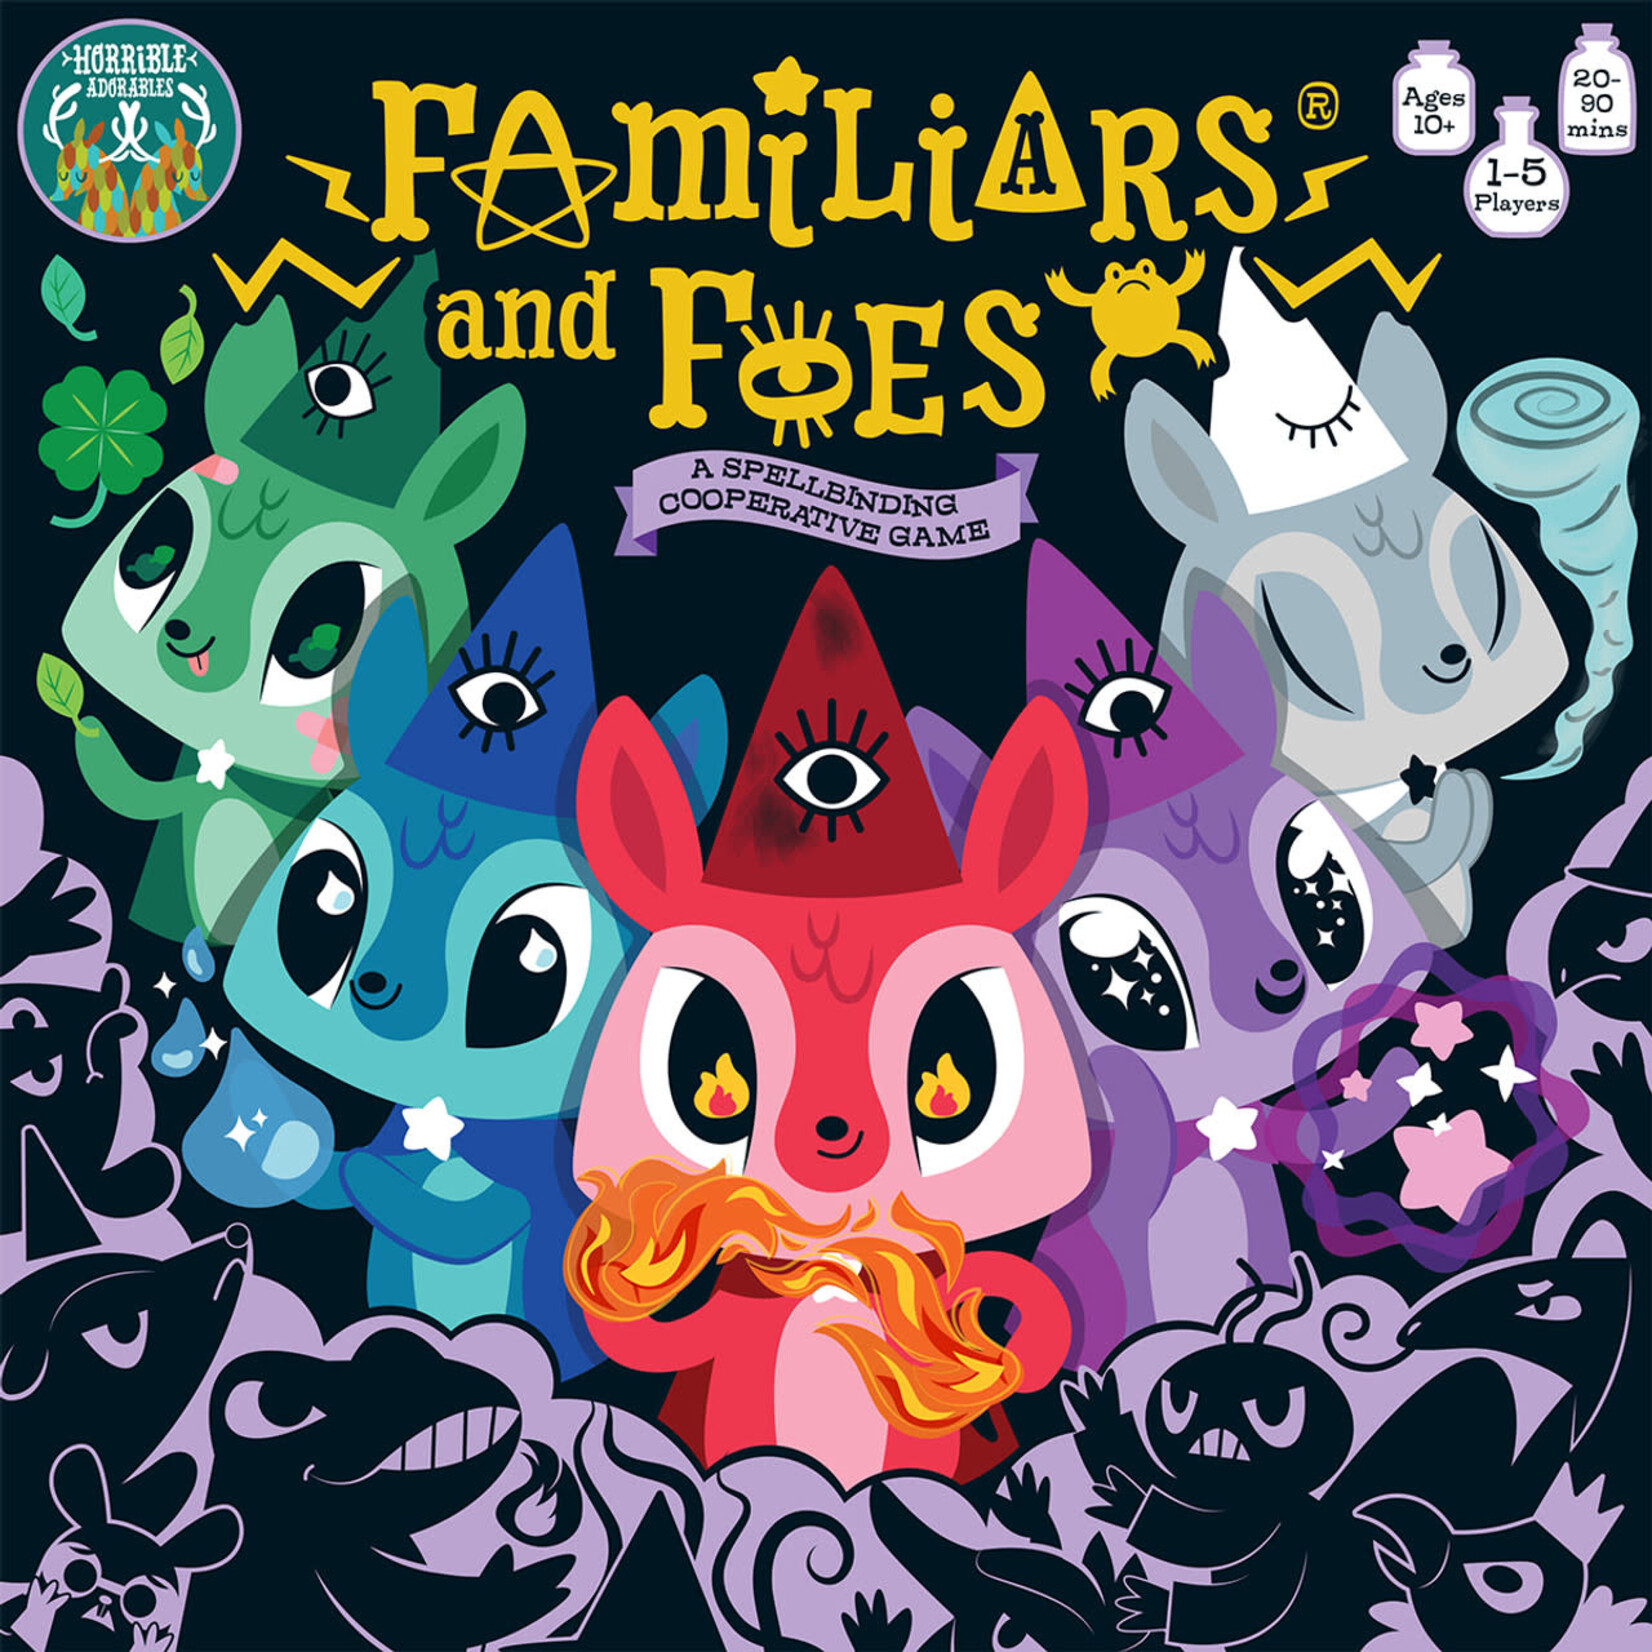 Horrible Adorables Familiars and Foes Deluxe Version